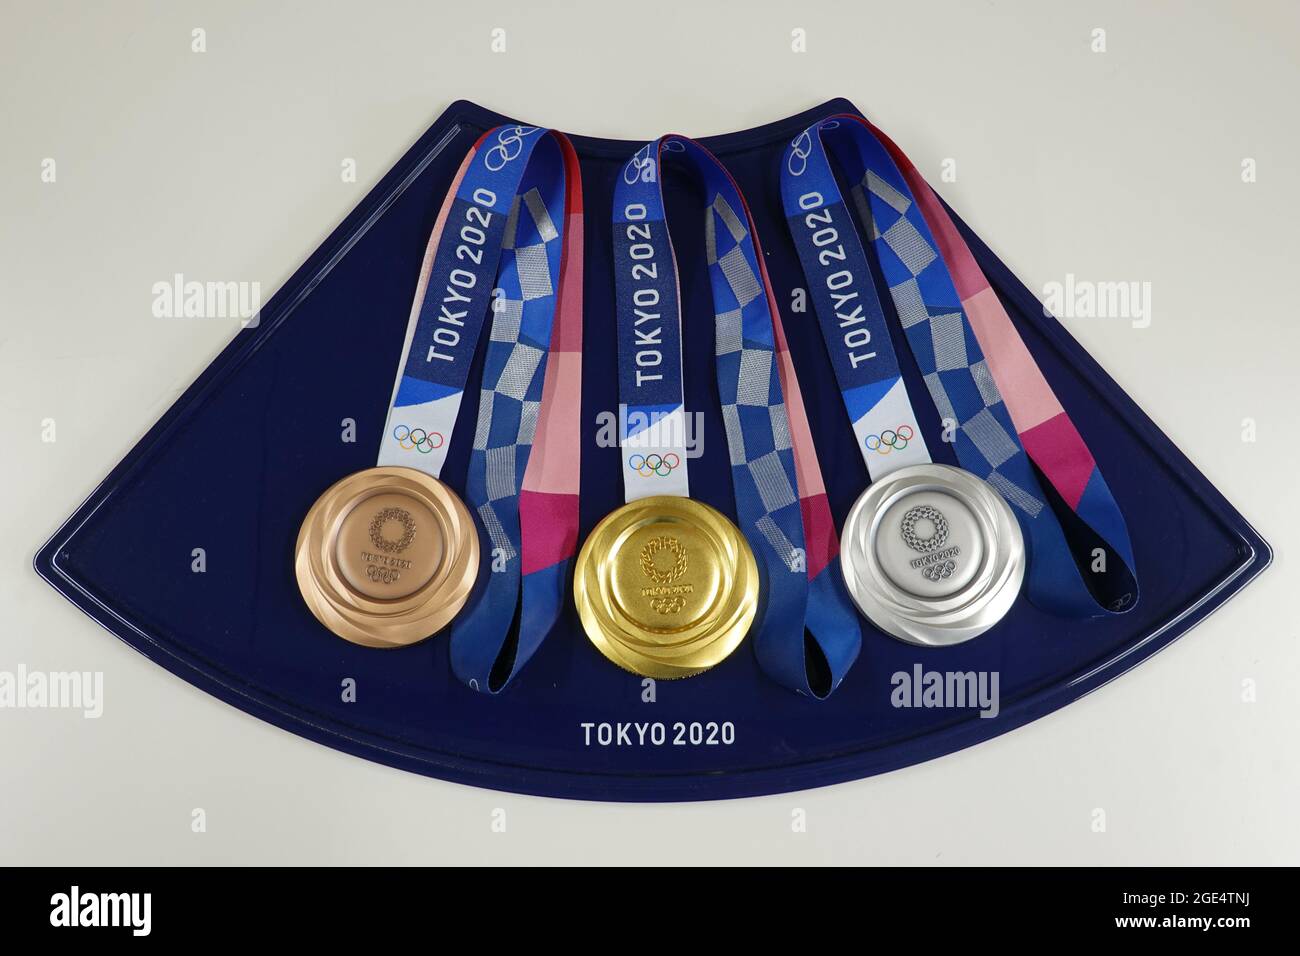 Tokyo 2020 Olympic gold, silver and bronze medals on a tray before a medal presentation Stock Photo